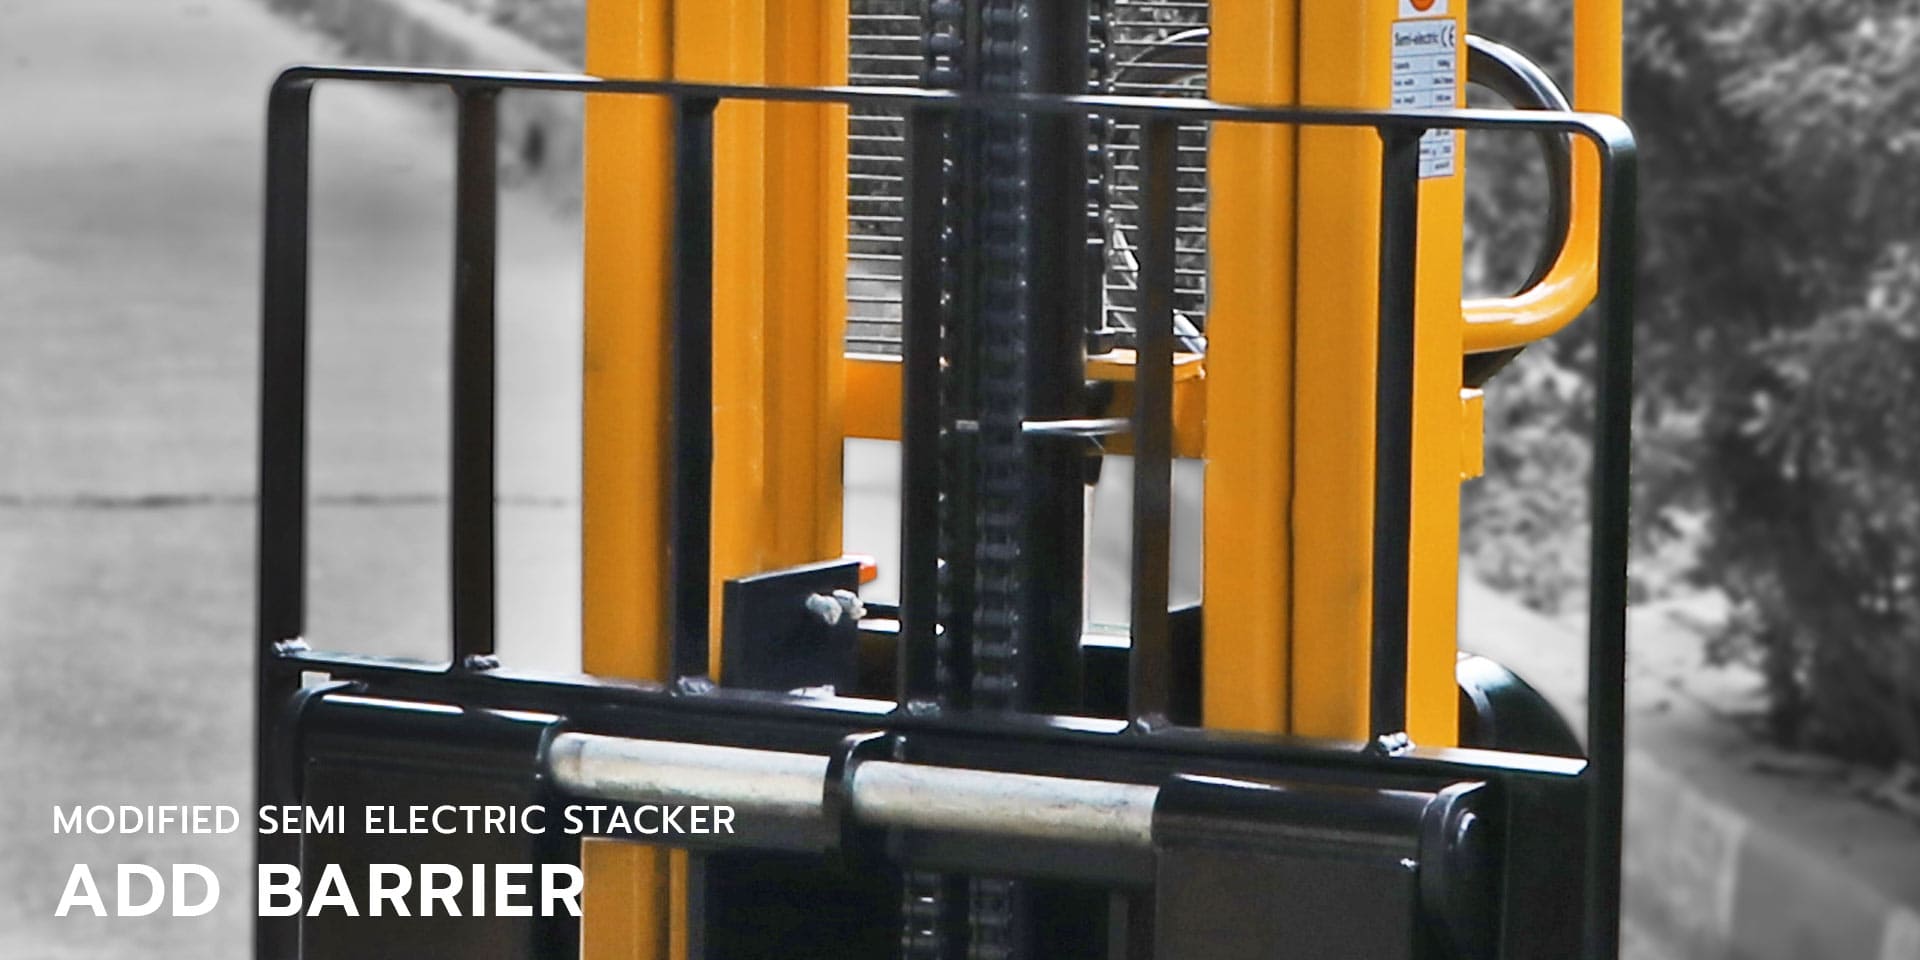 Modified adjustable fork semi electric stacker